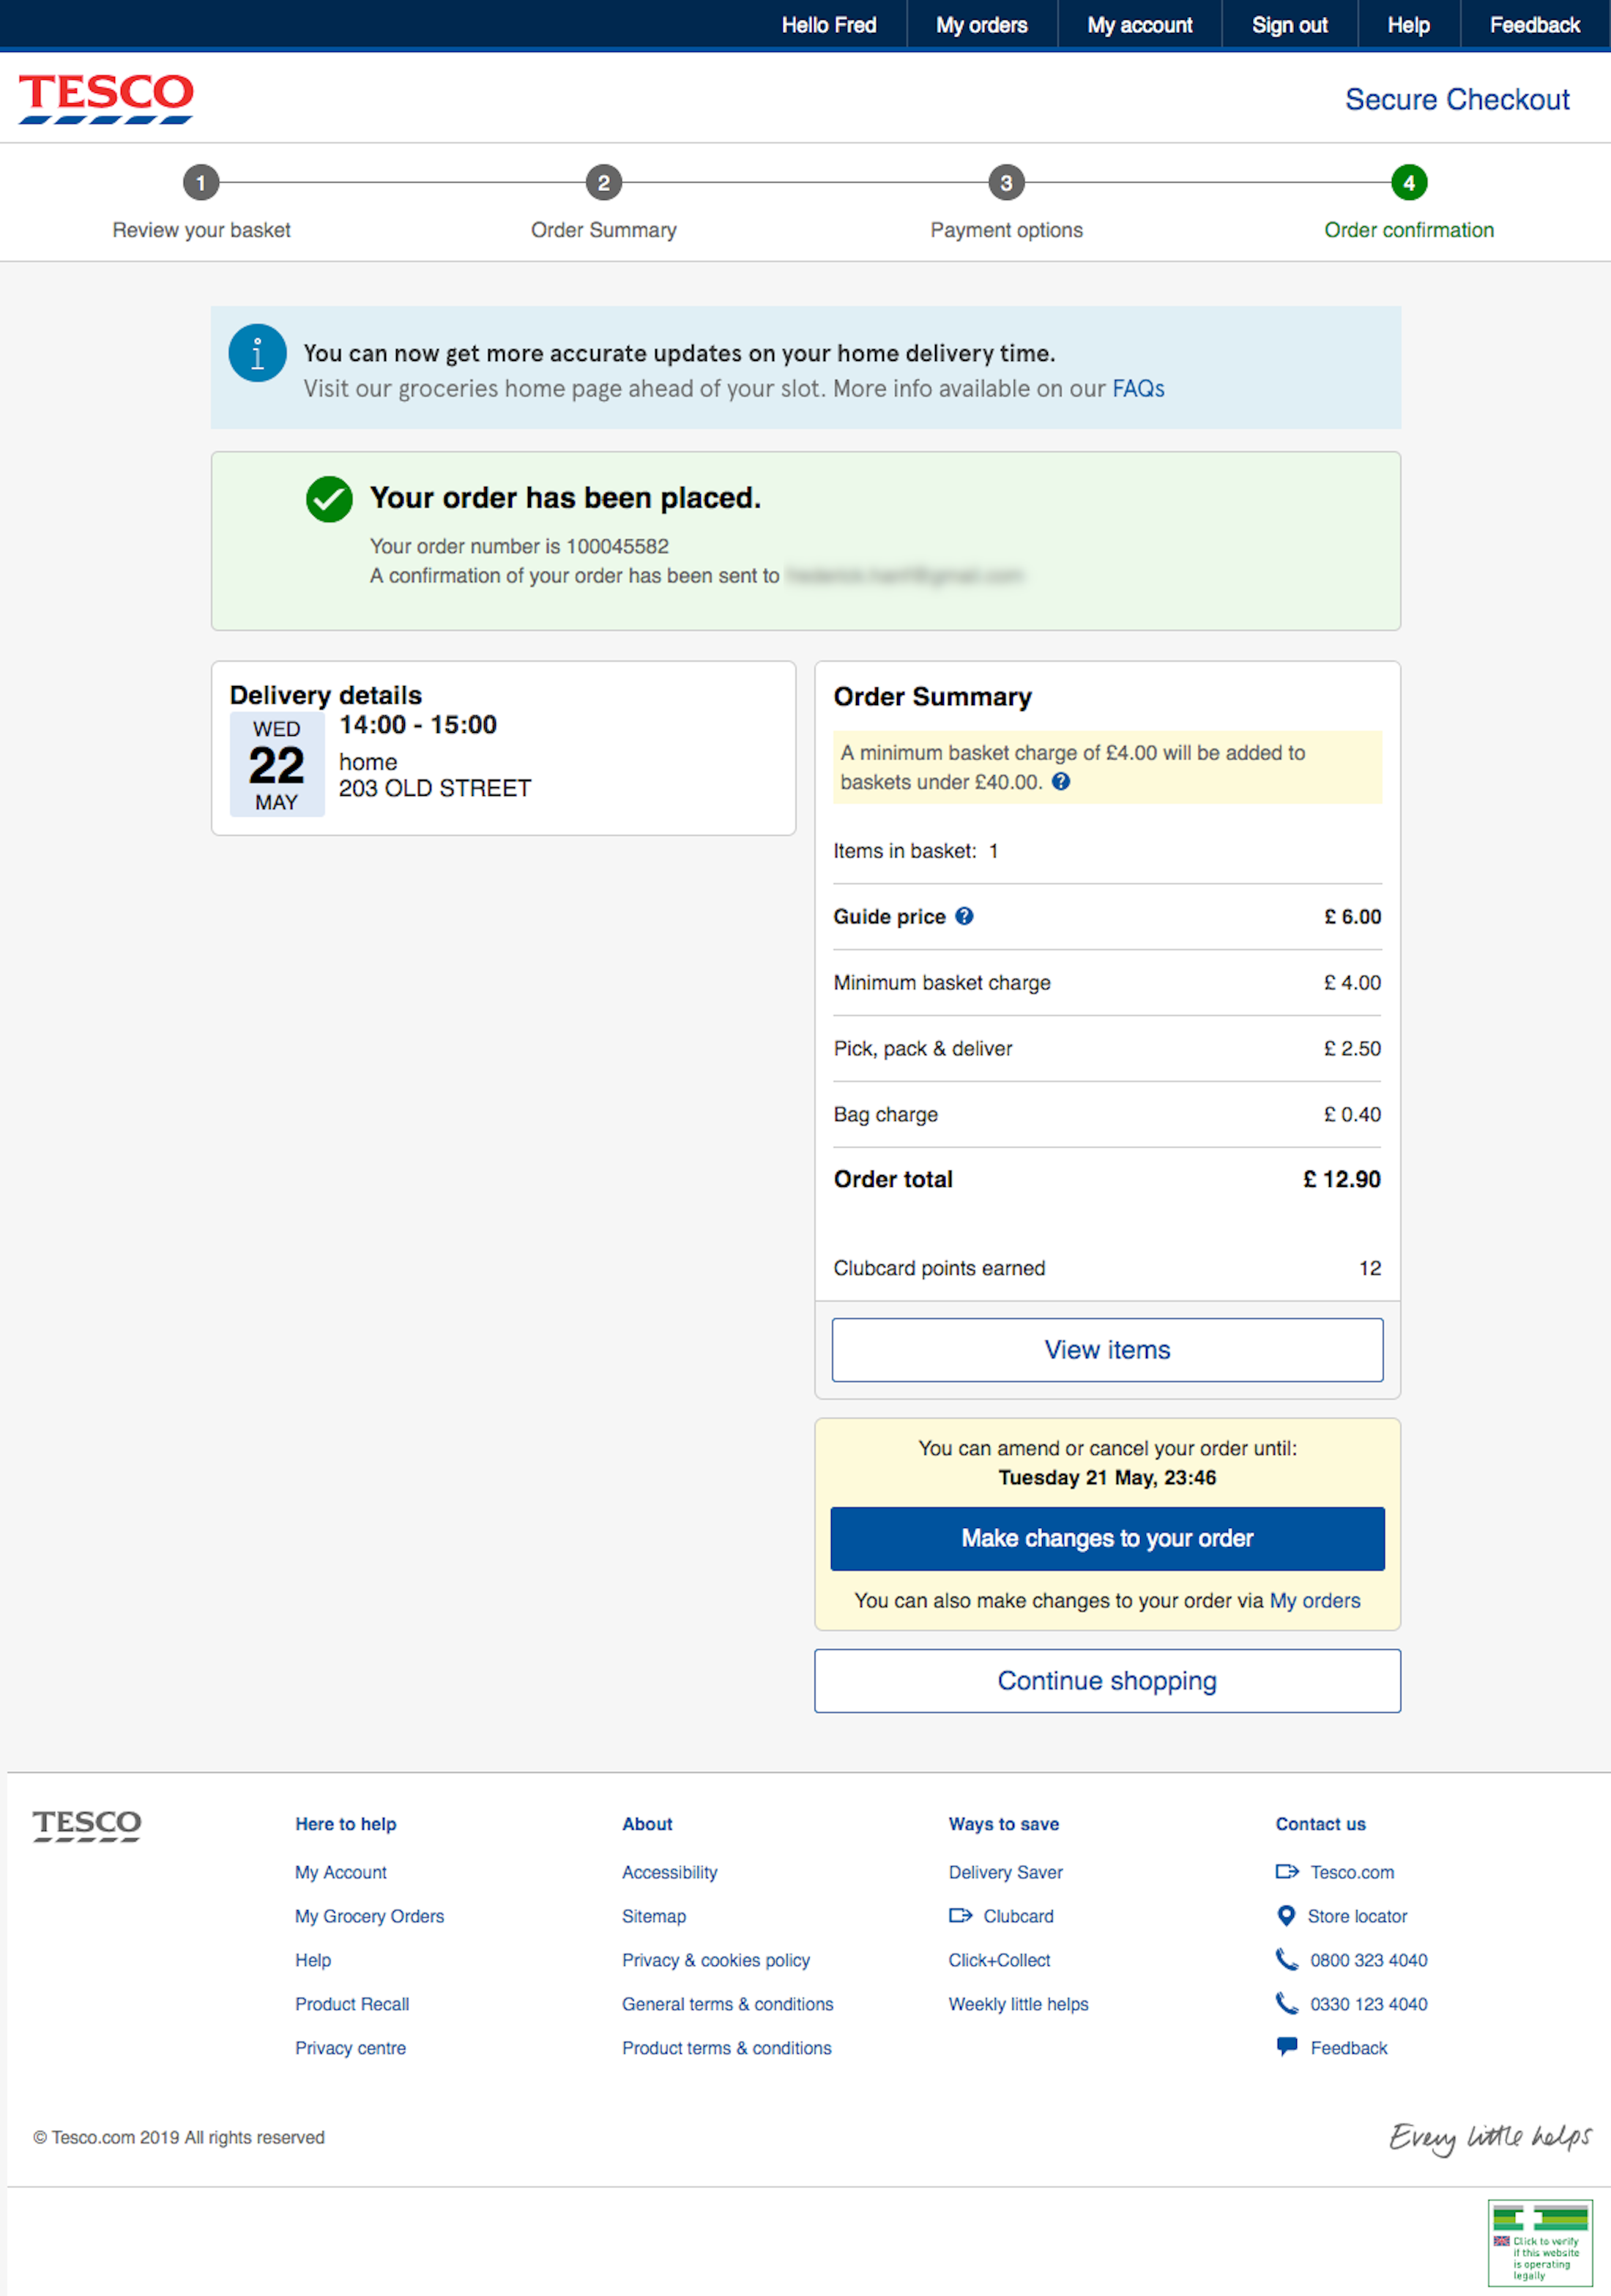 tesco-s-receipt-order-confirmation-370-of-480-receipt-order-confirmation-examples